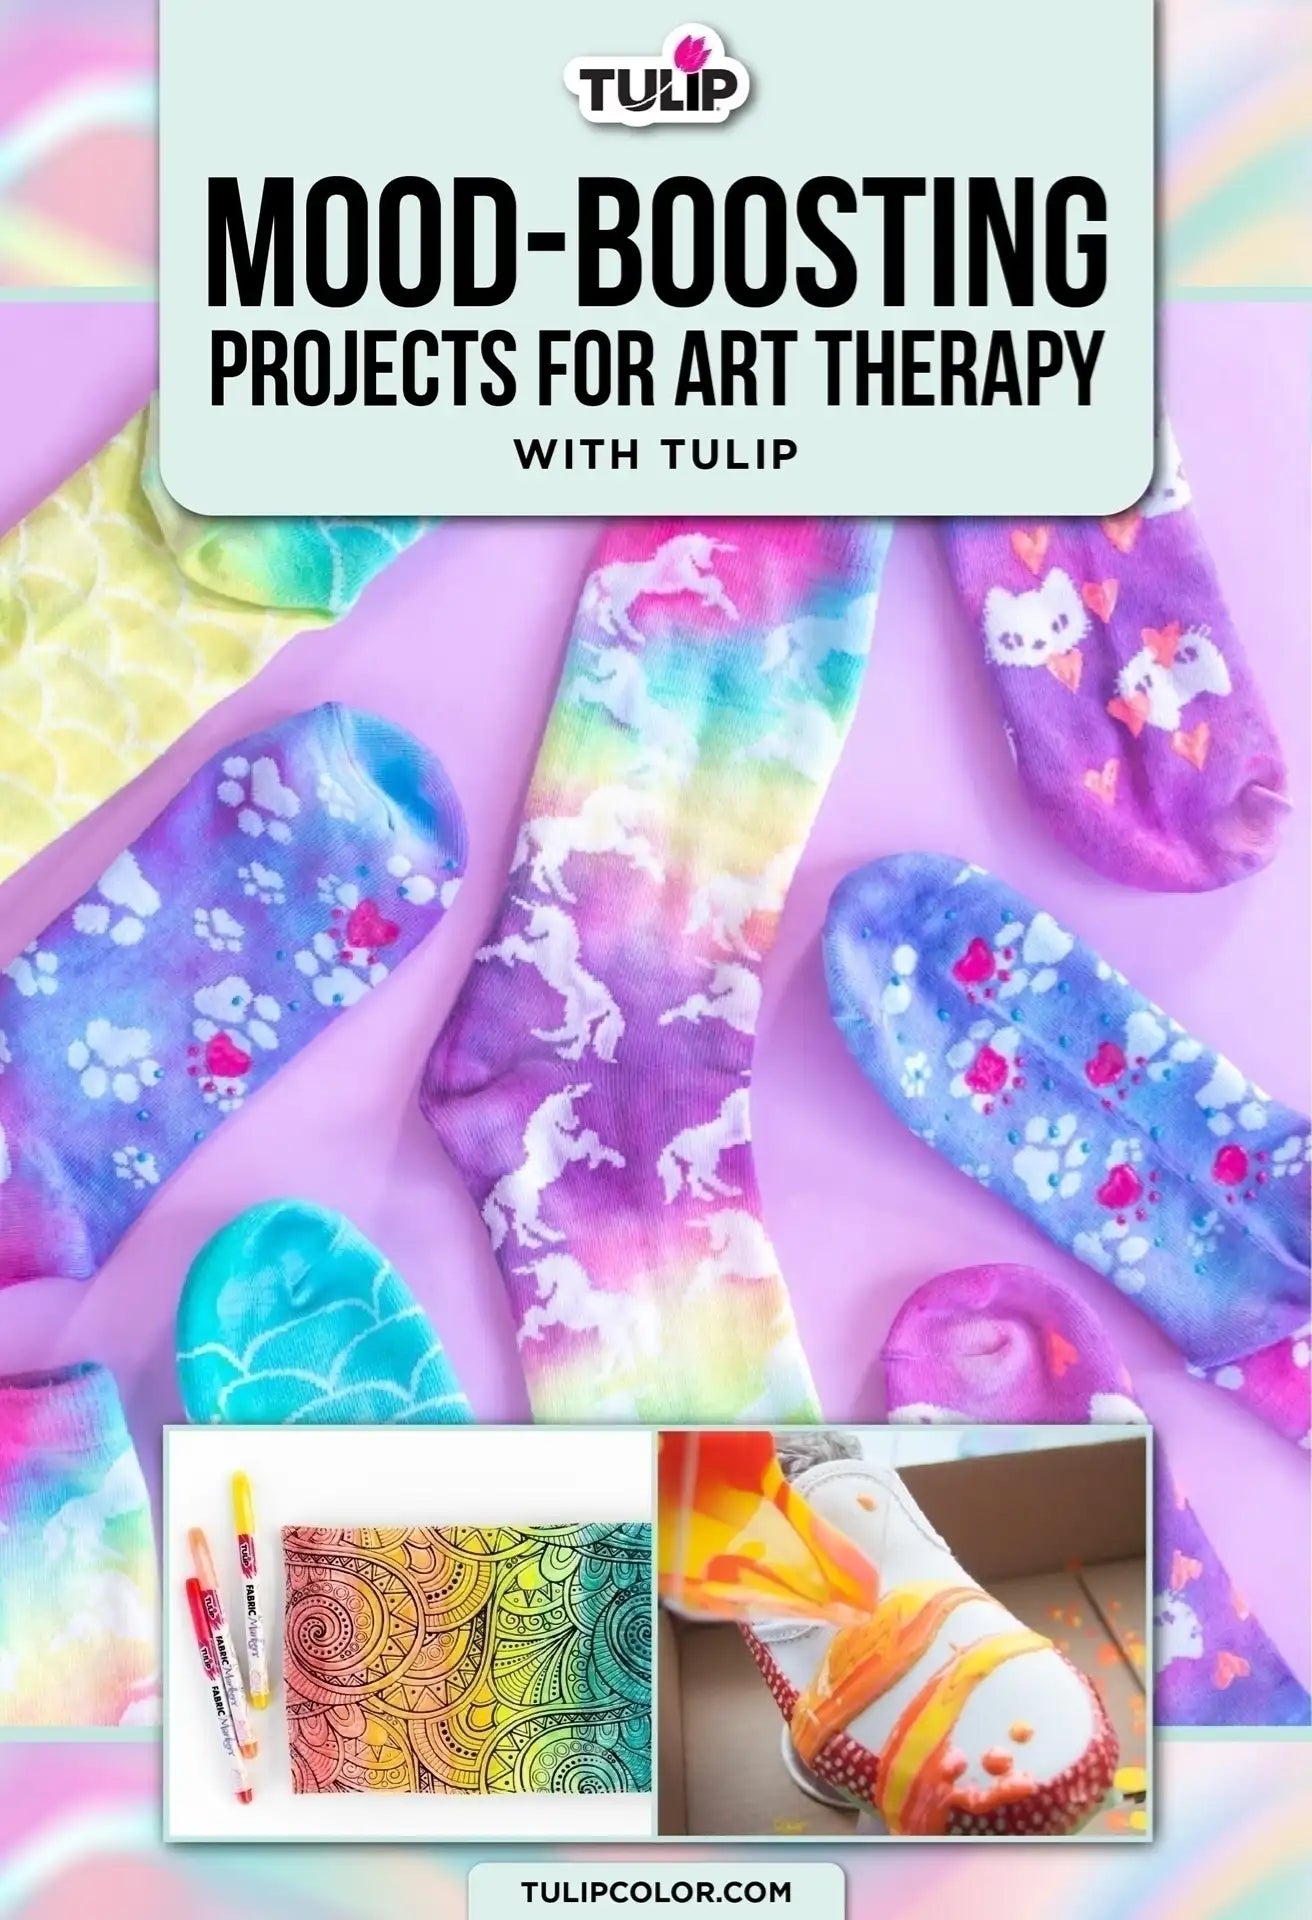 5 Mood-Boosting Projects for Art Therapy with Tulip